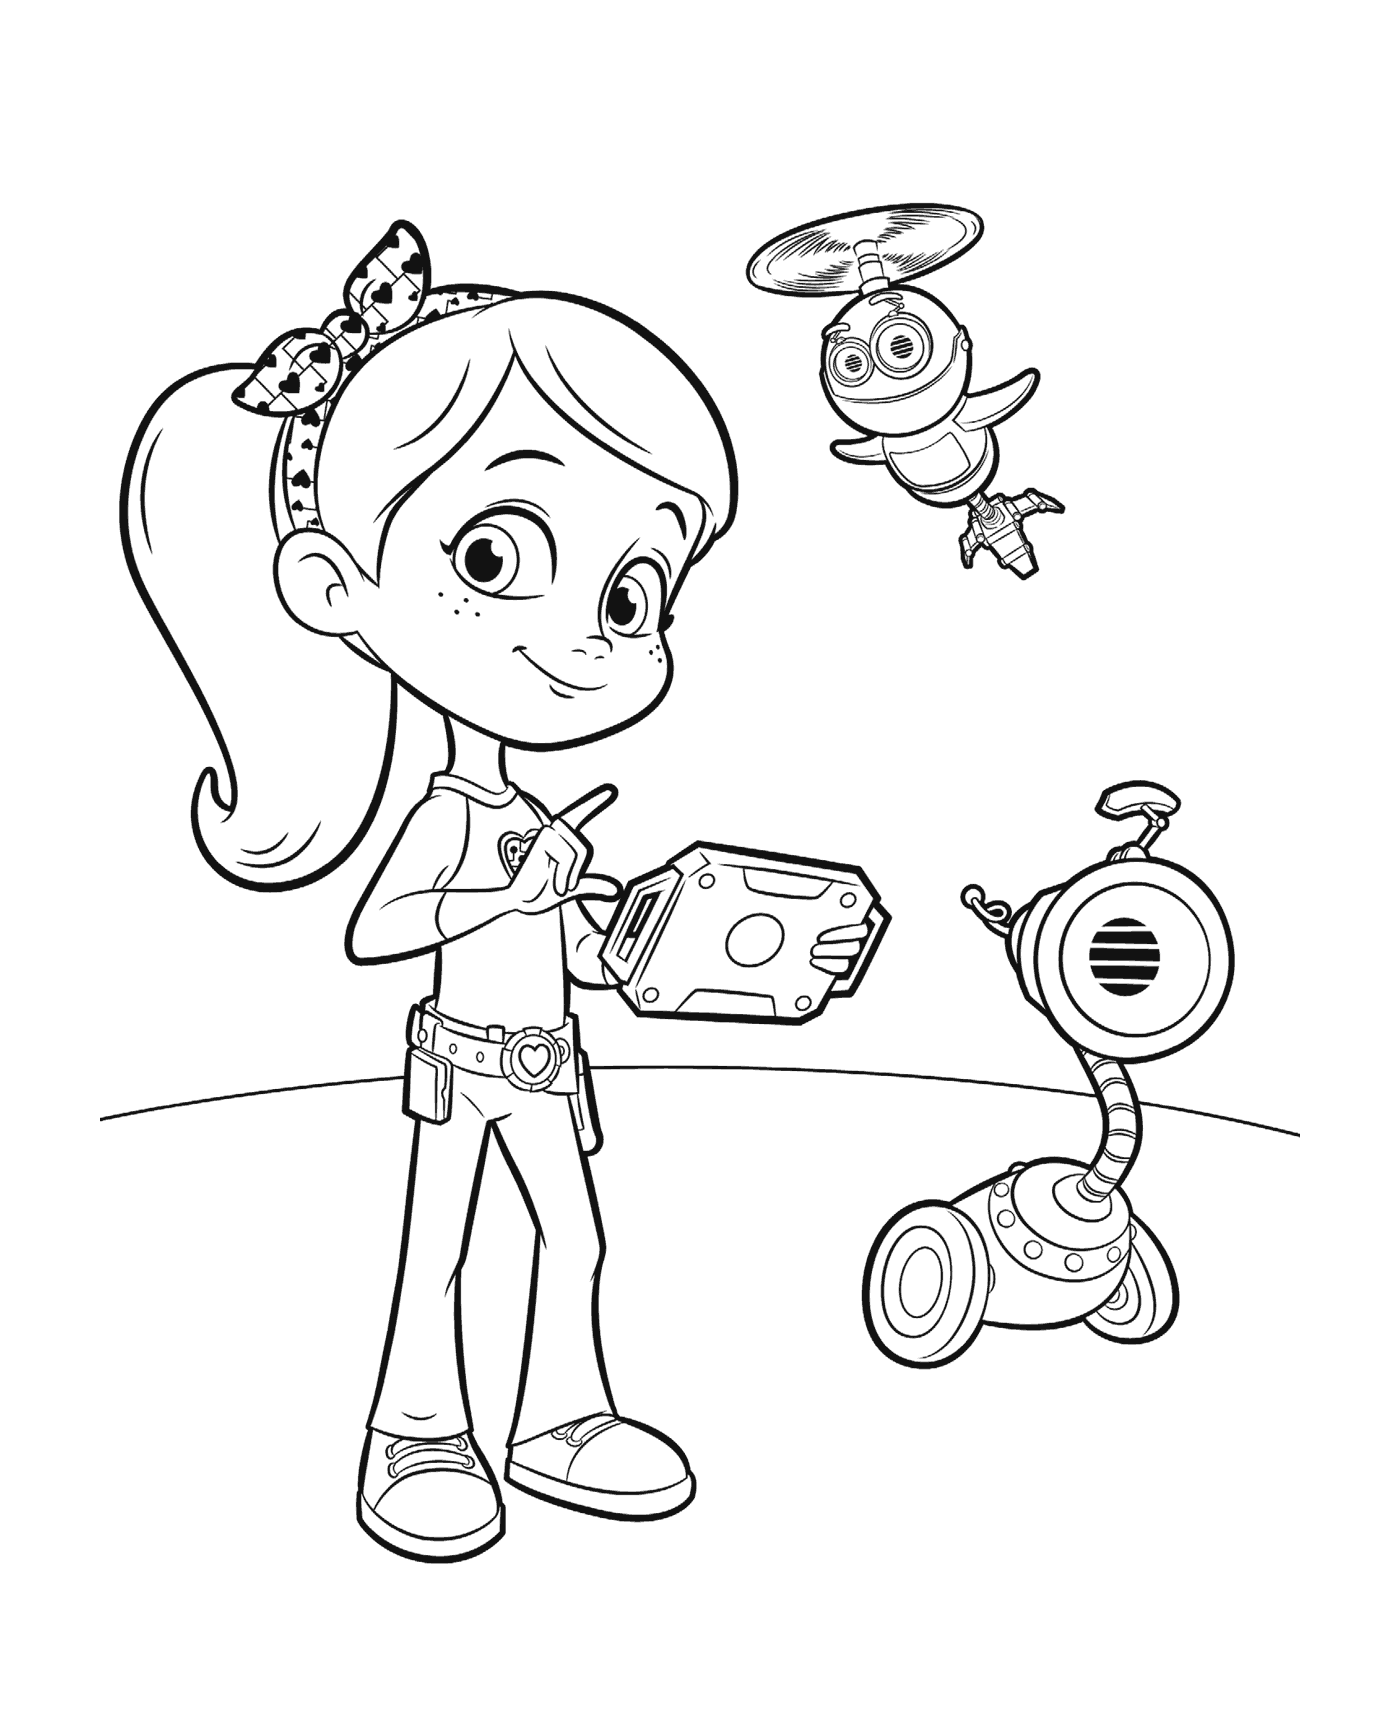  Girl with Rusty Rivets robot 